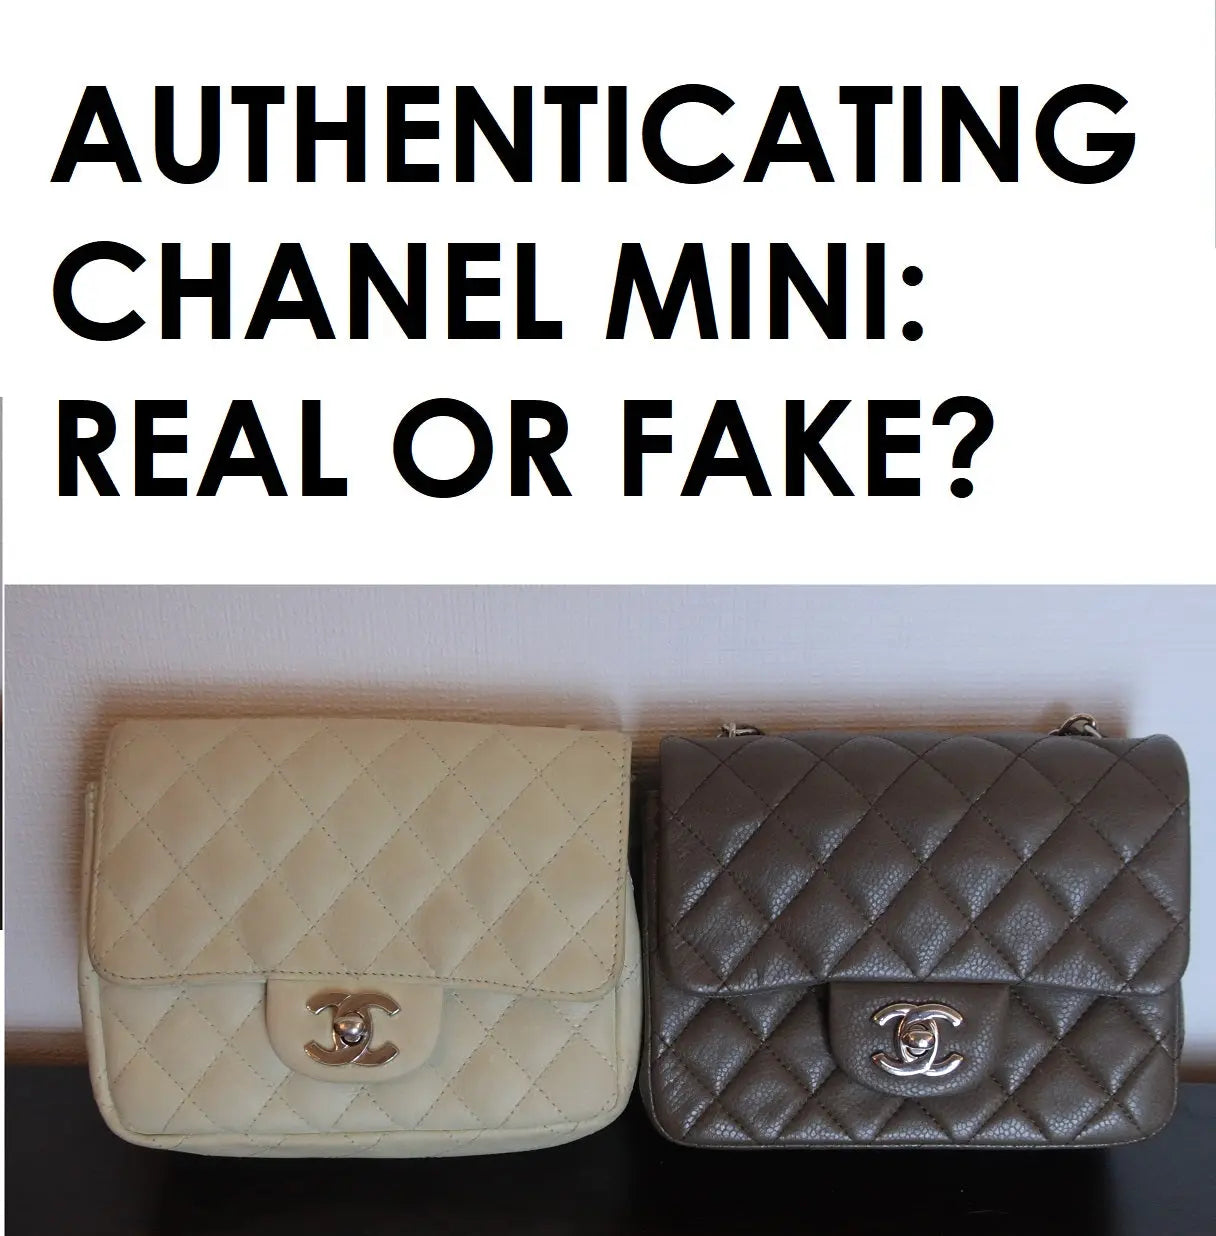 How to Tell if a Chanel Bag is Real or Fake: Authenticating a